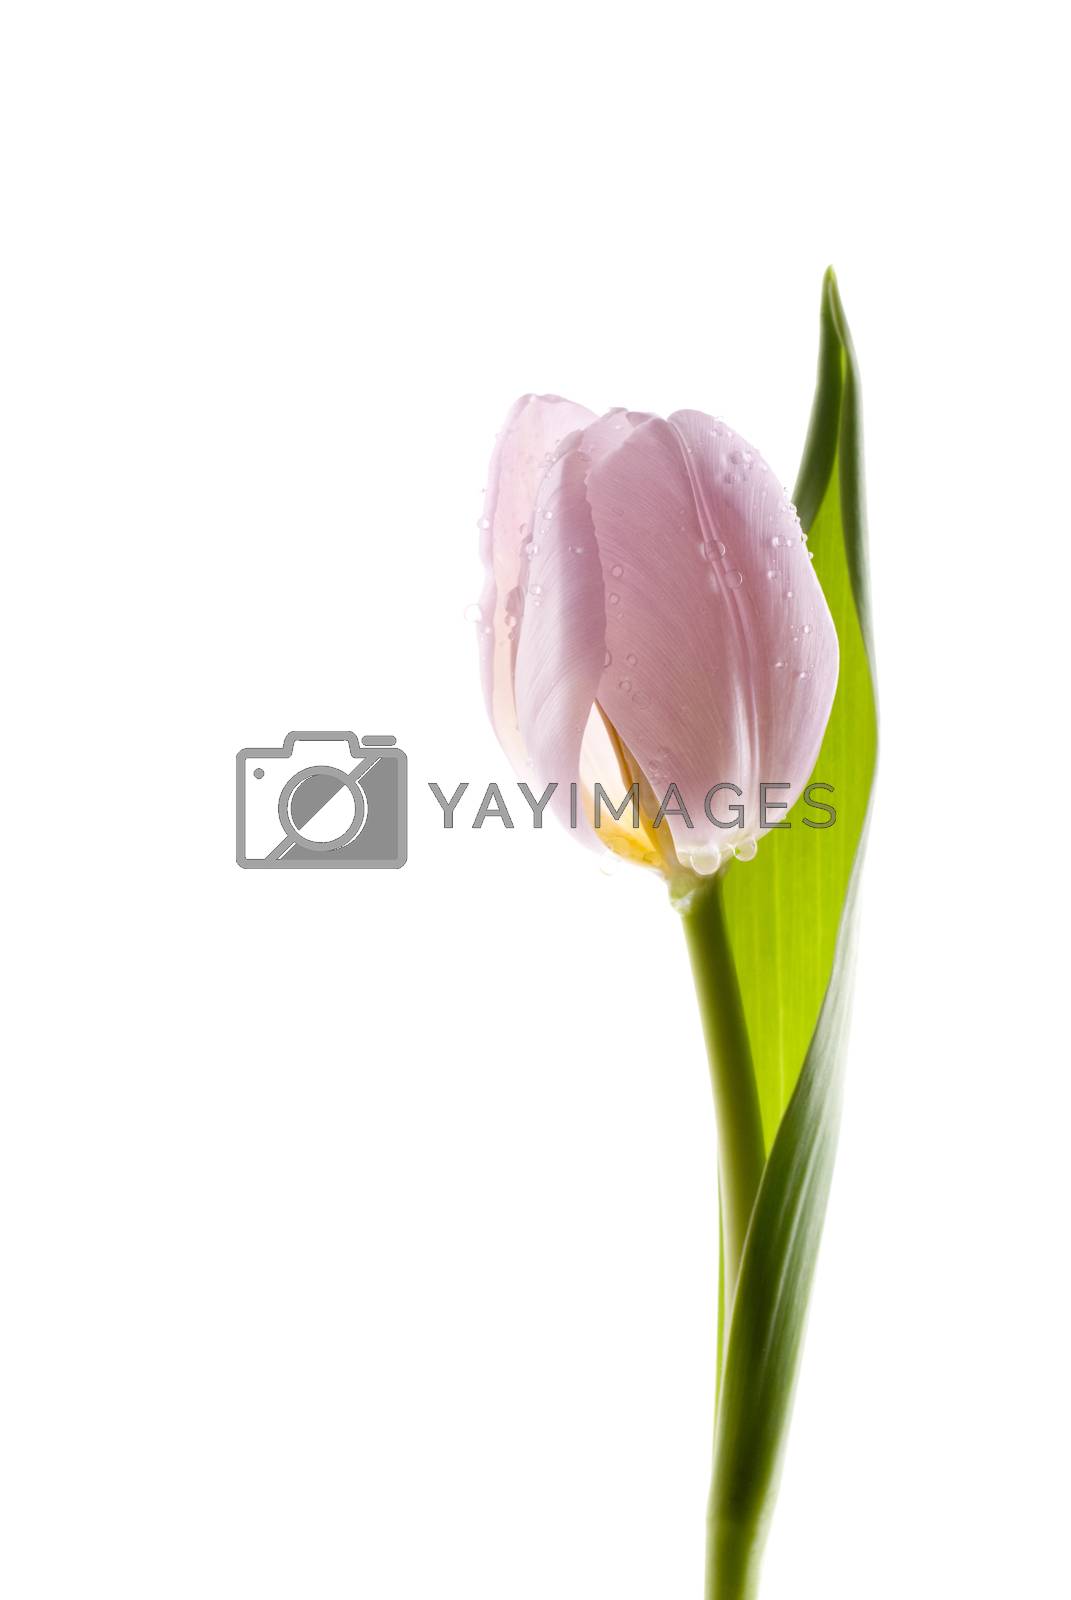 Royalty free image of Tulip by ockra